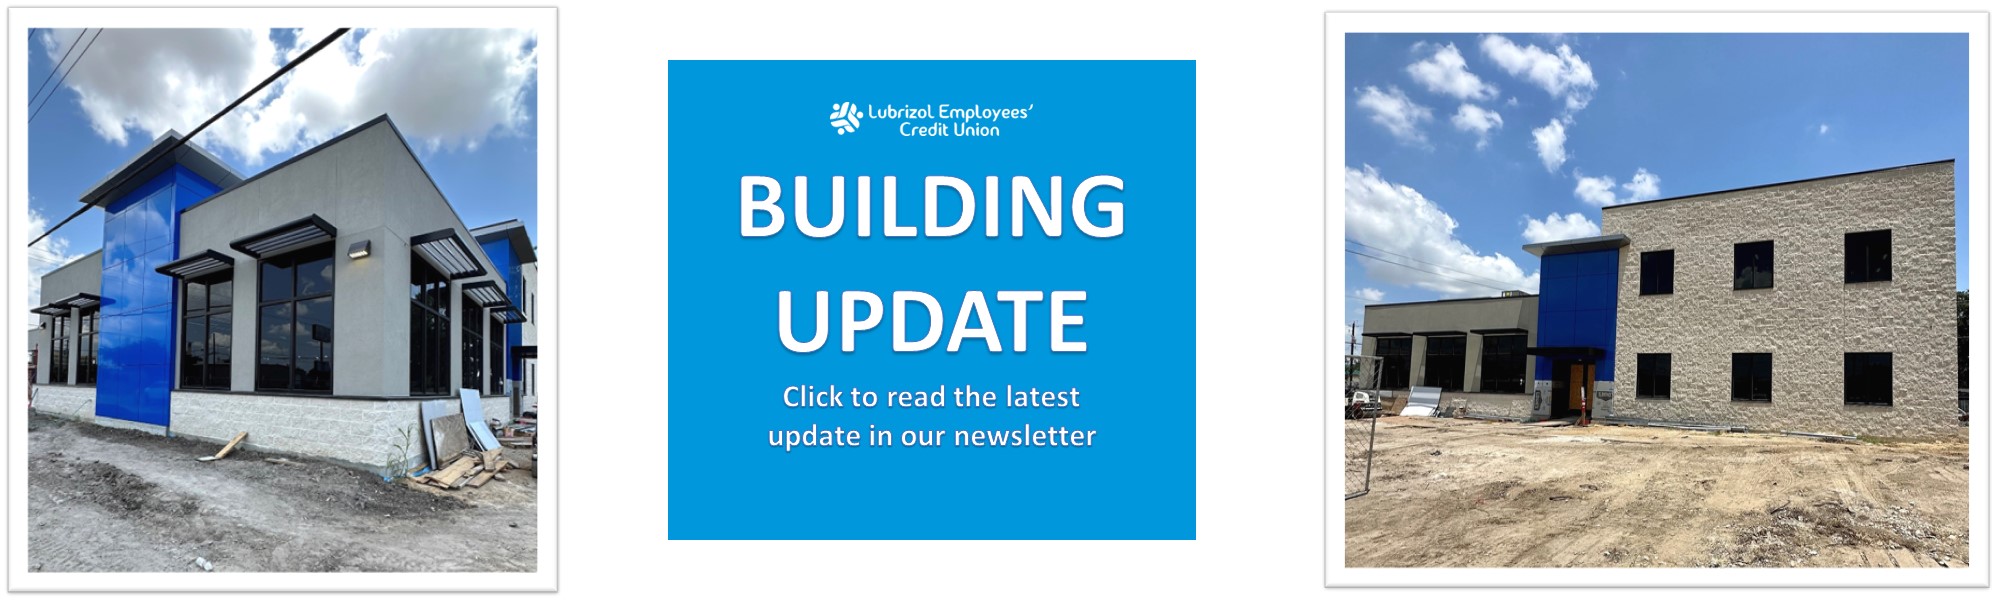 New building pictures. CLick to read more about the updates in the newsletter.